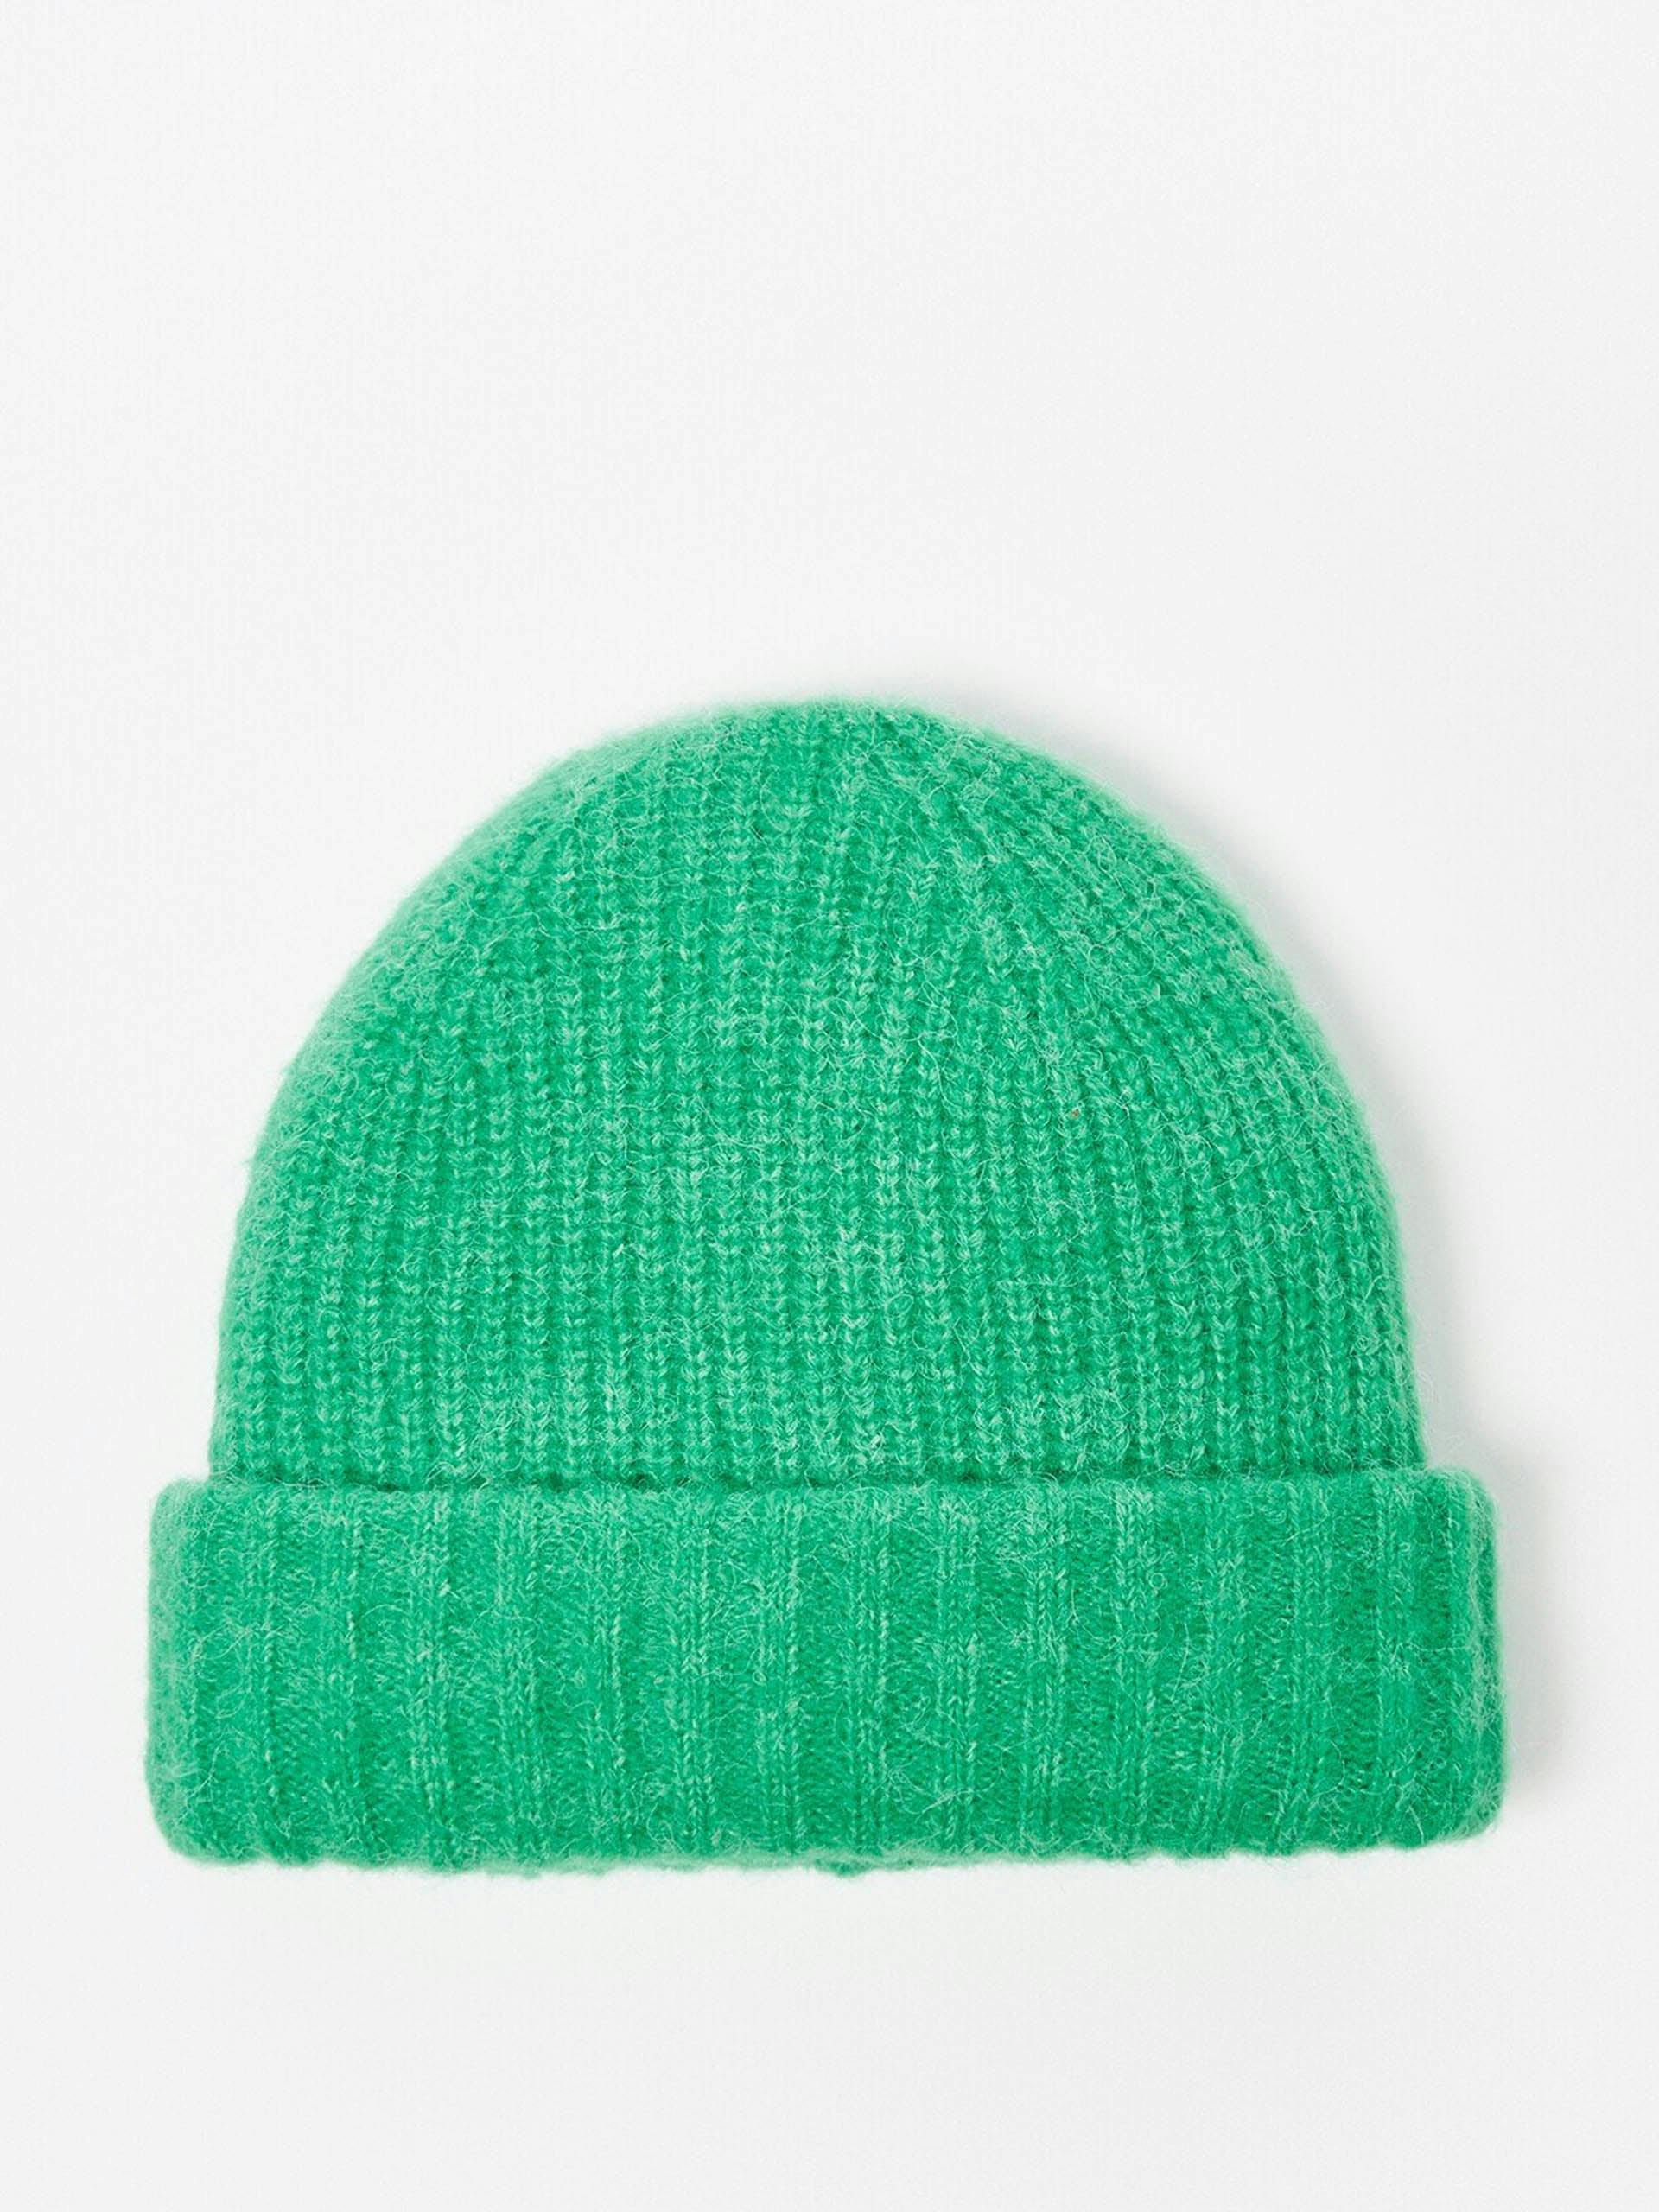 Double rib green knitted beanie hat